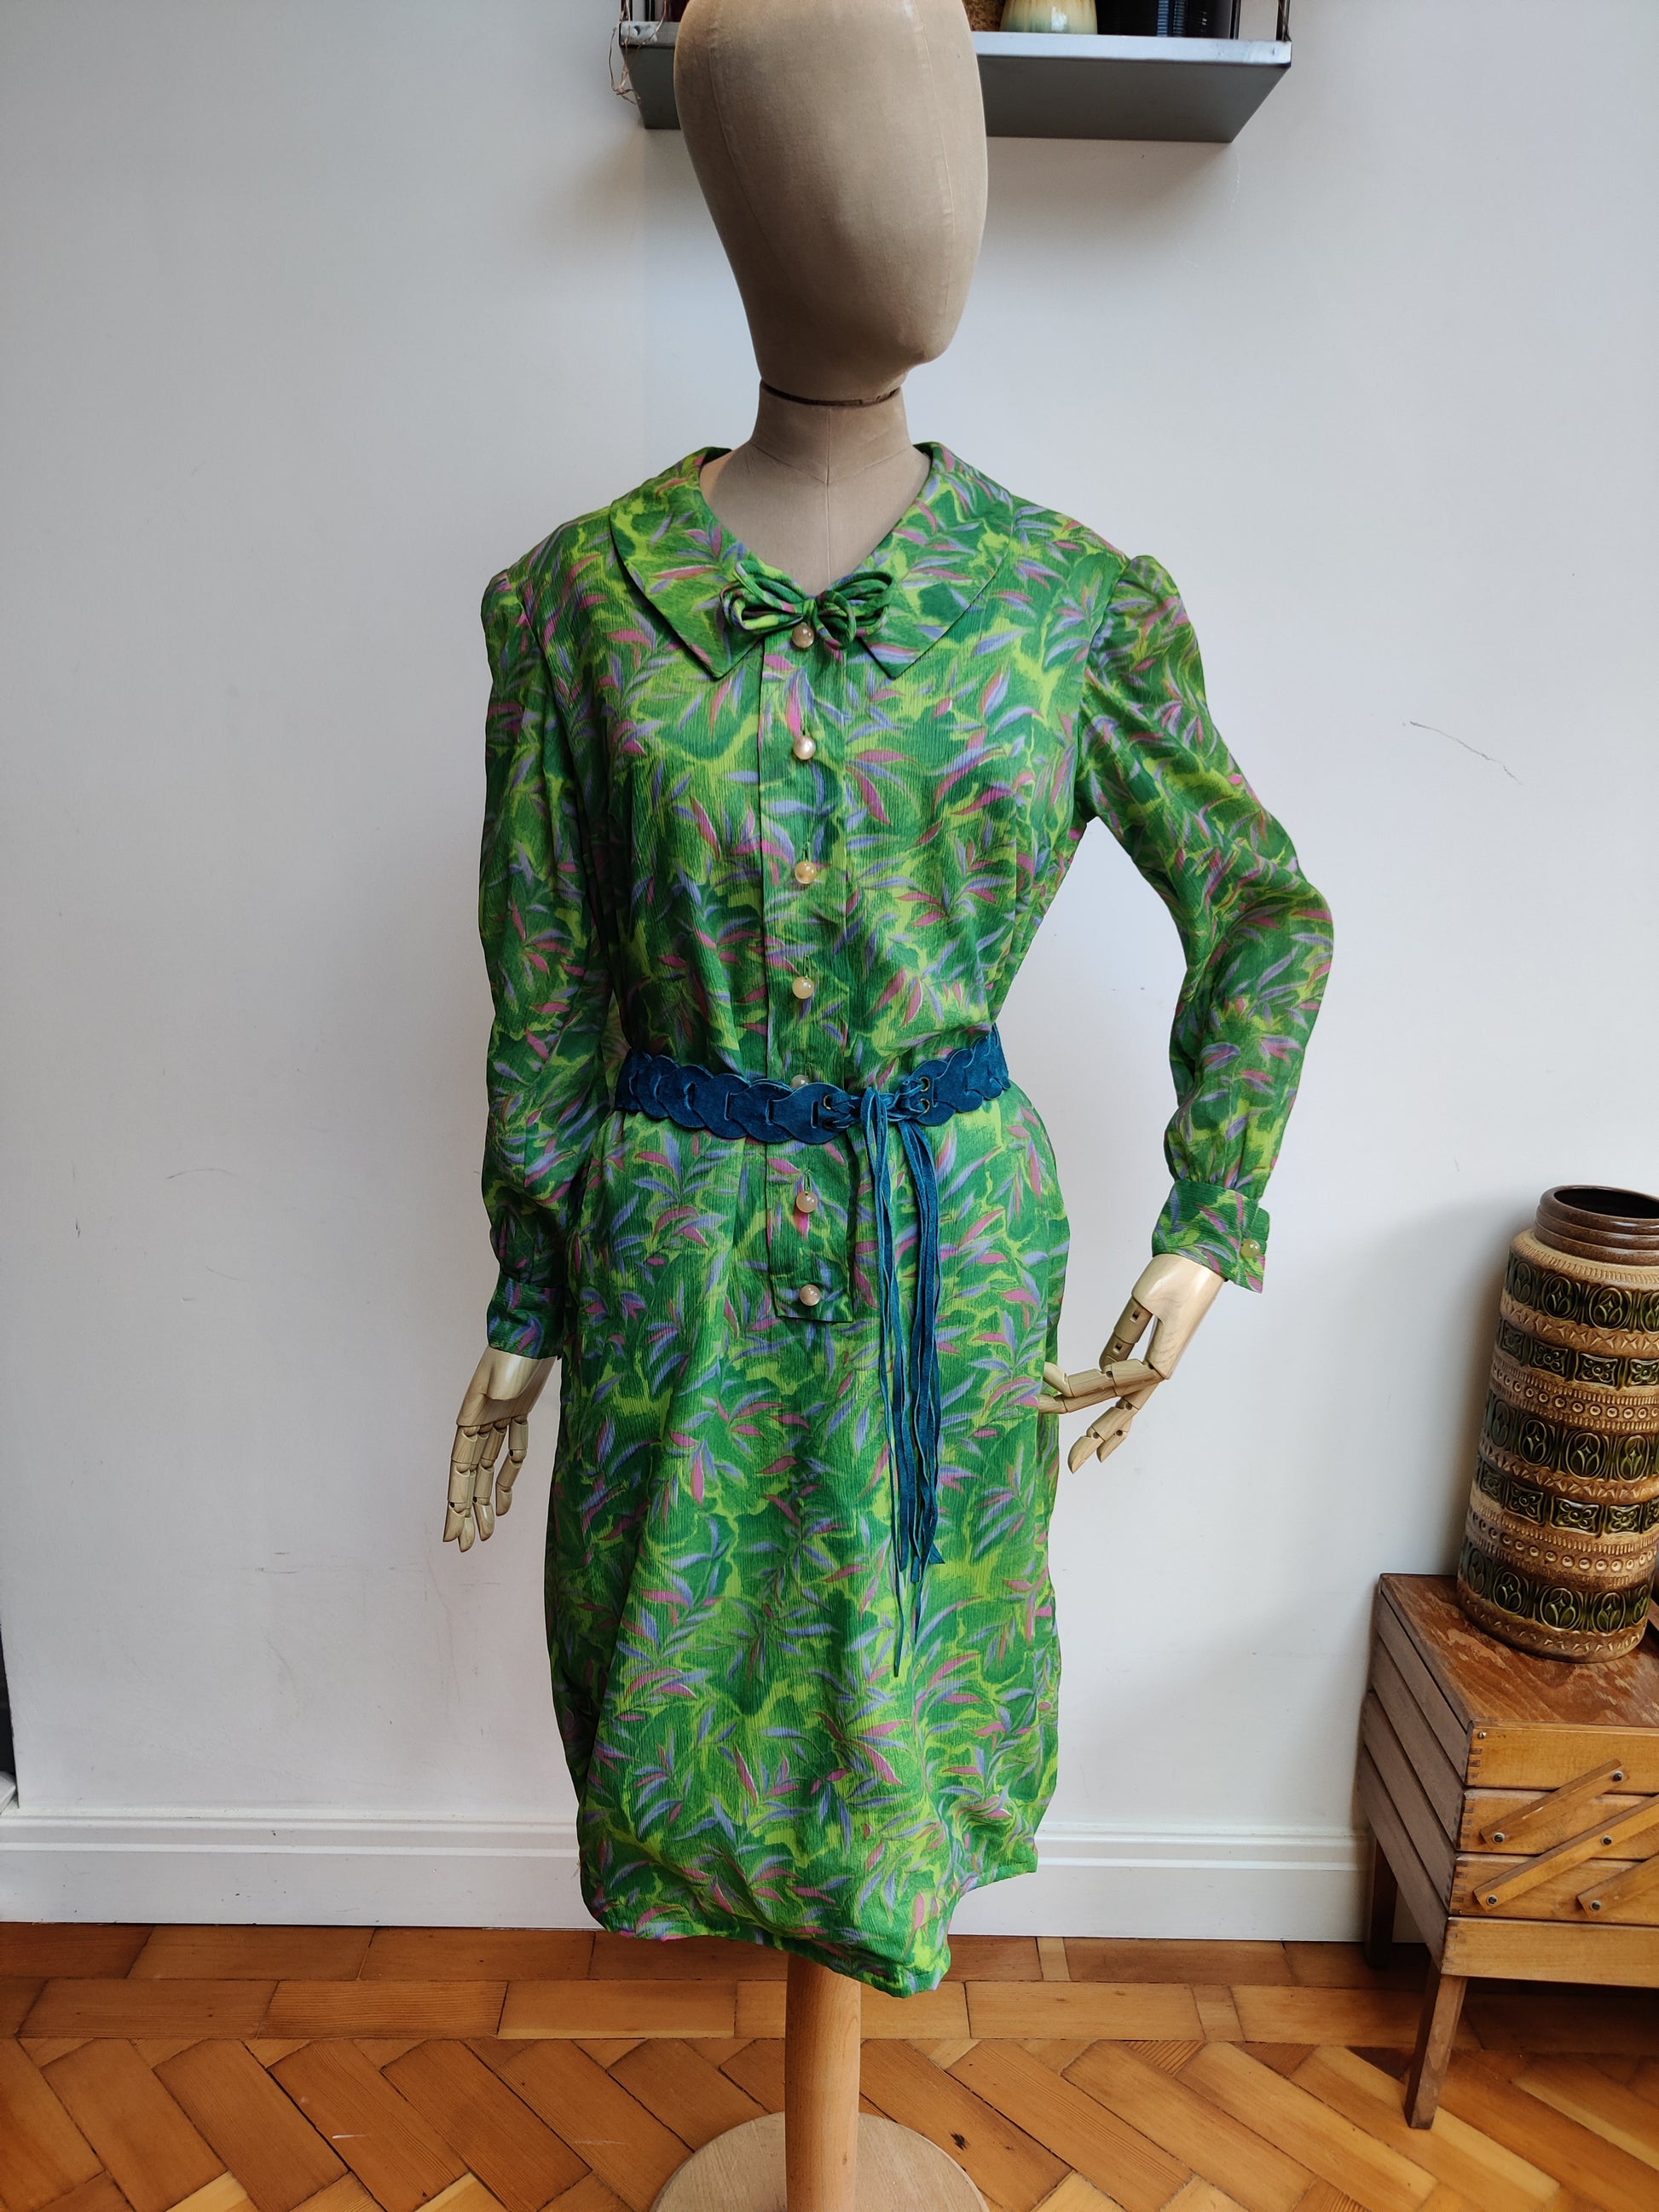 Lovely green vintage dress with button front